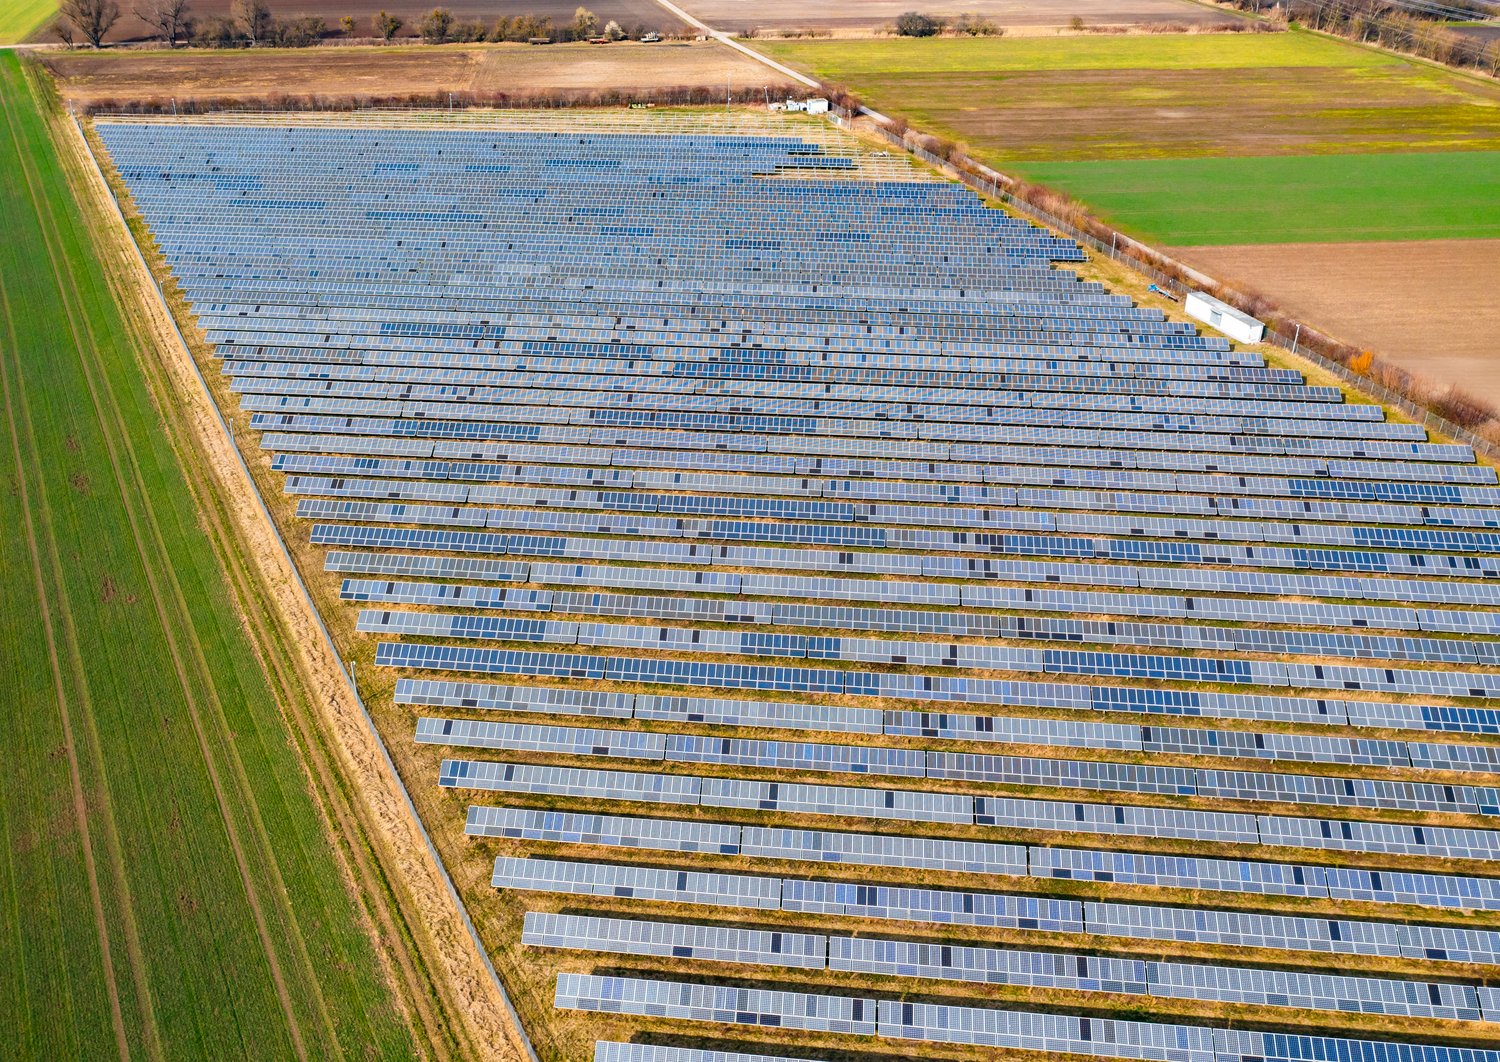 In the middle are slightly damaged PV systems. Surrounding the PV Systems there are yellow and green fields.